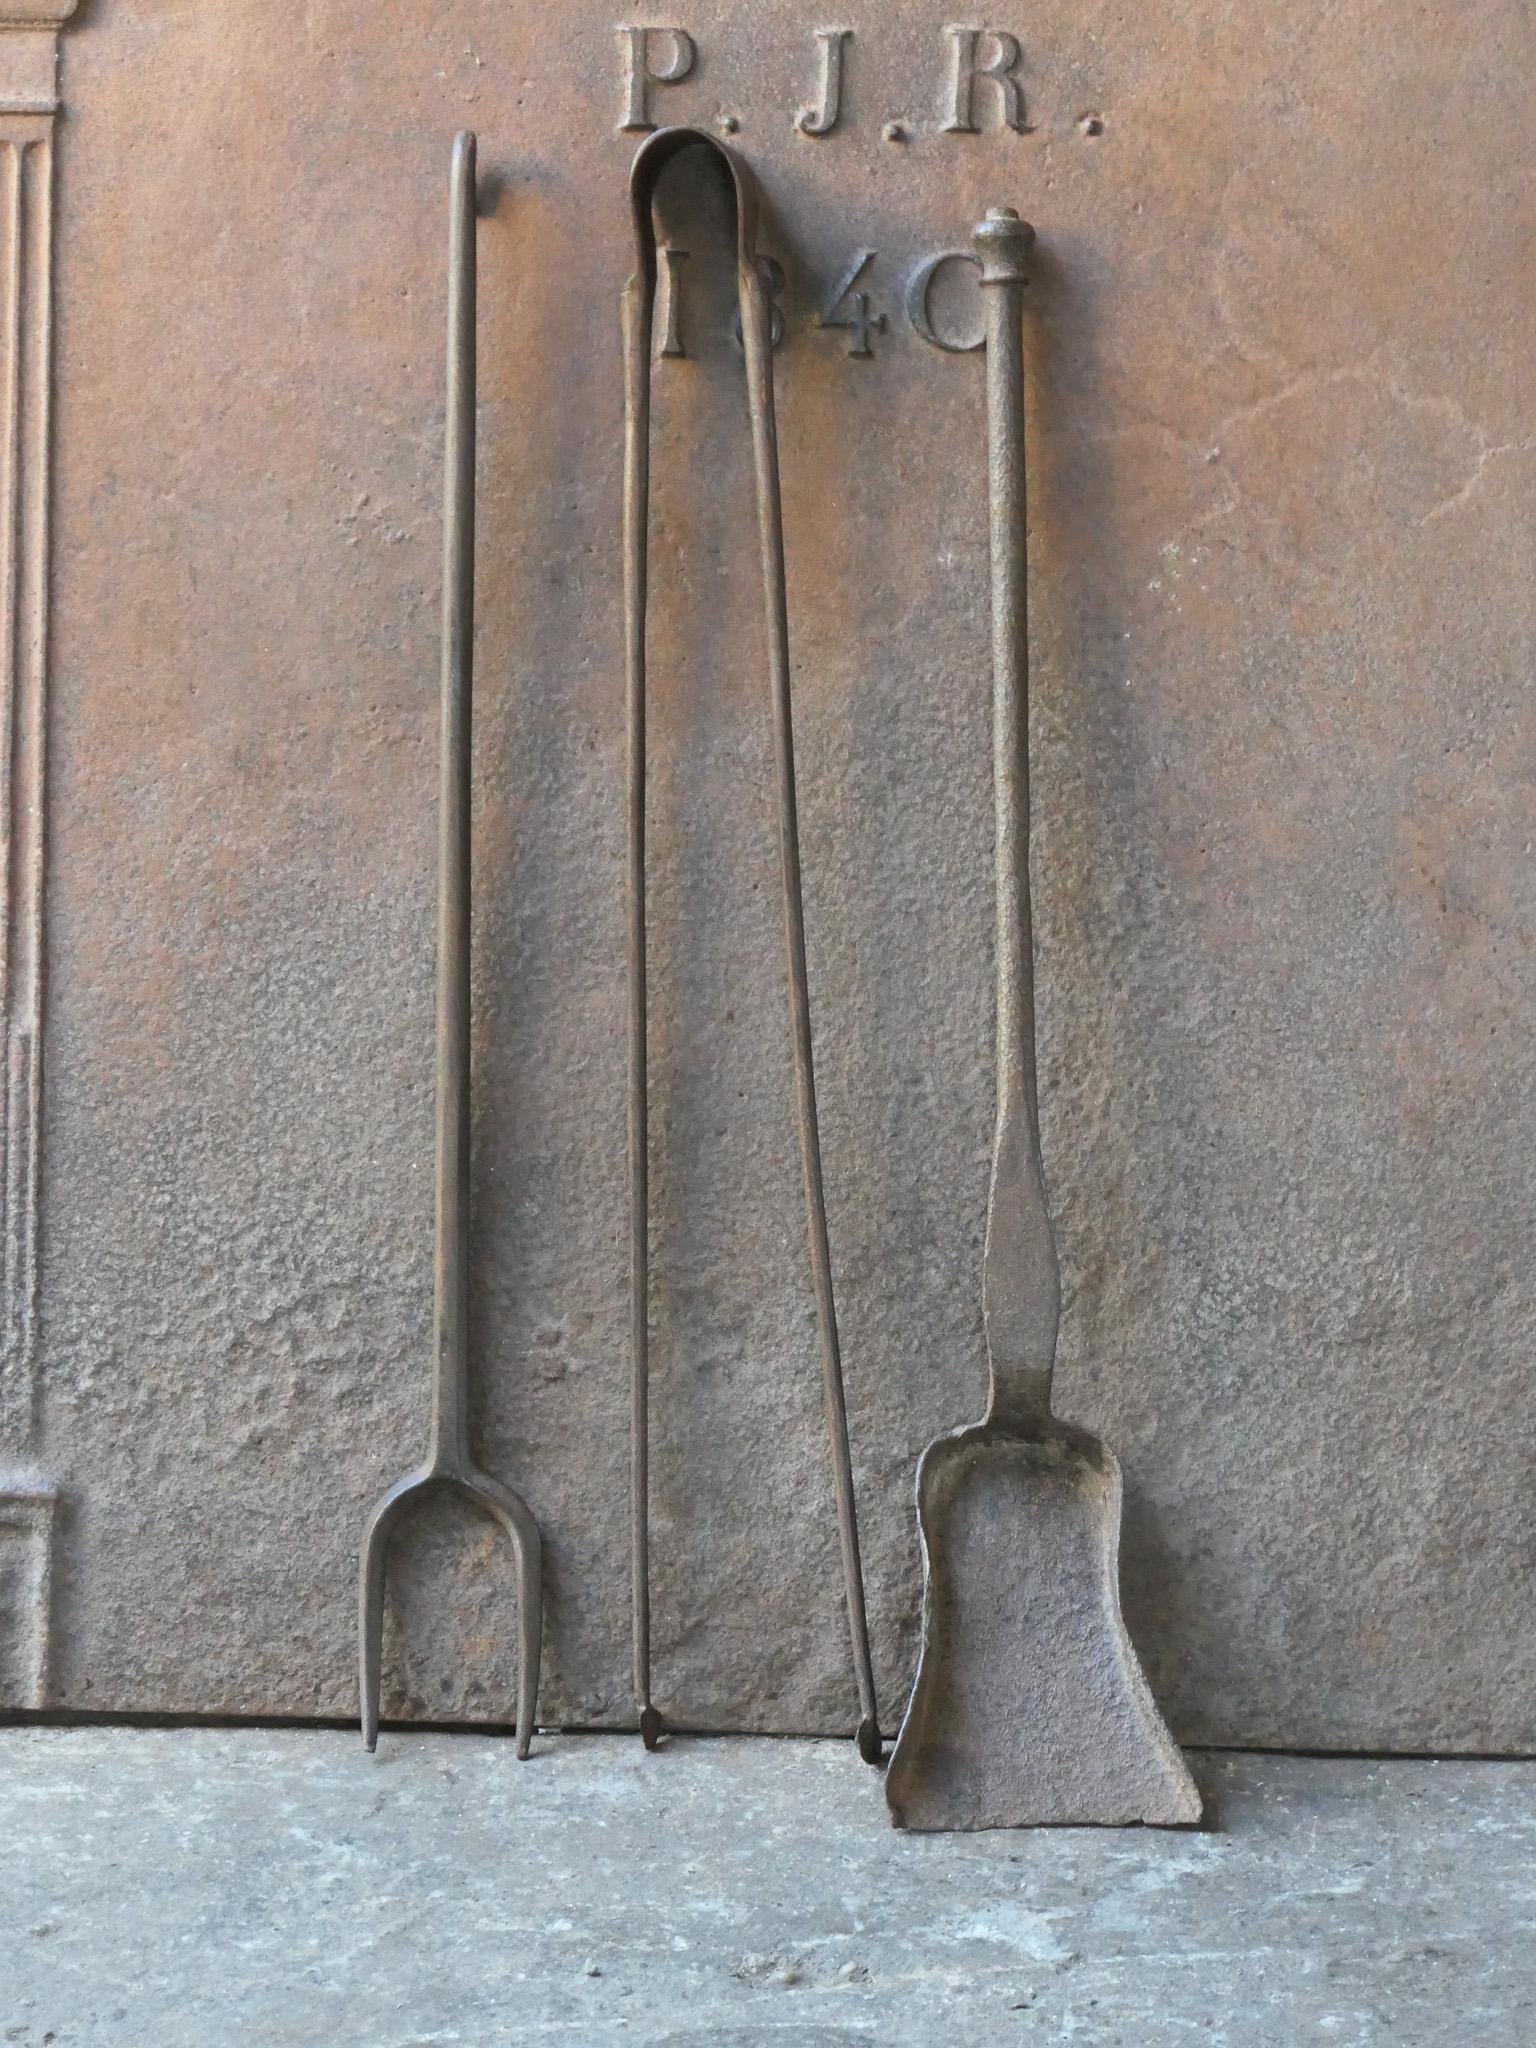 18th century French fireplace tool set. The tool set consists of tongs, shovel, and a fire fork. The tools are made of wrought iron. The set is in a good condition and fit for use in the fireplace.